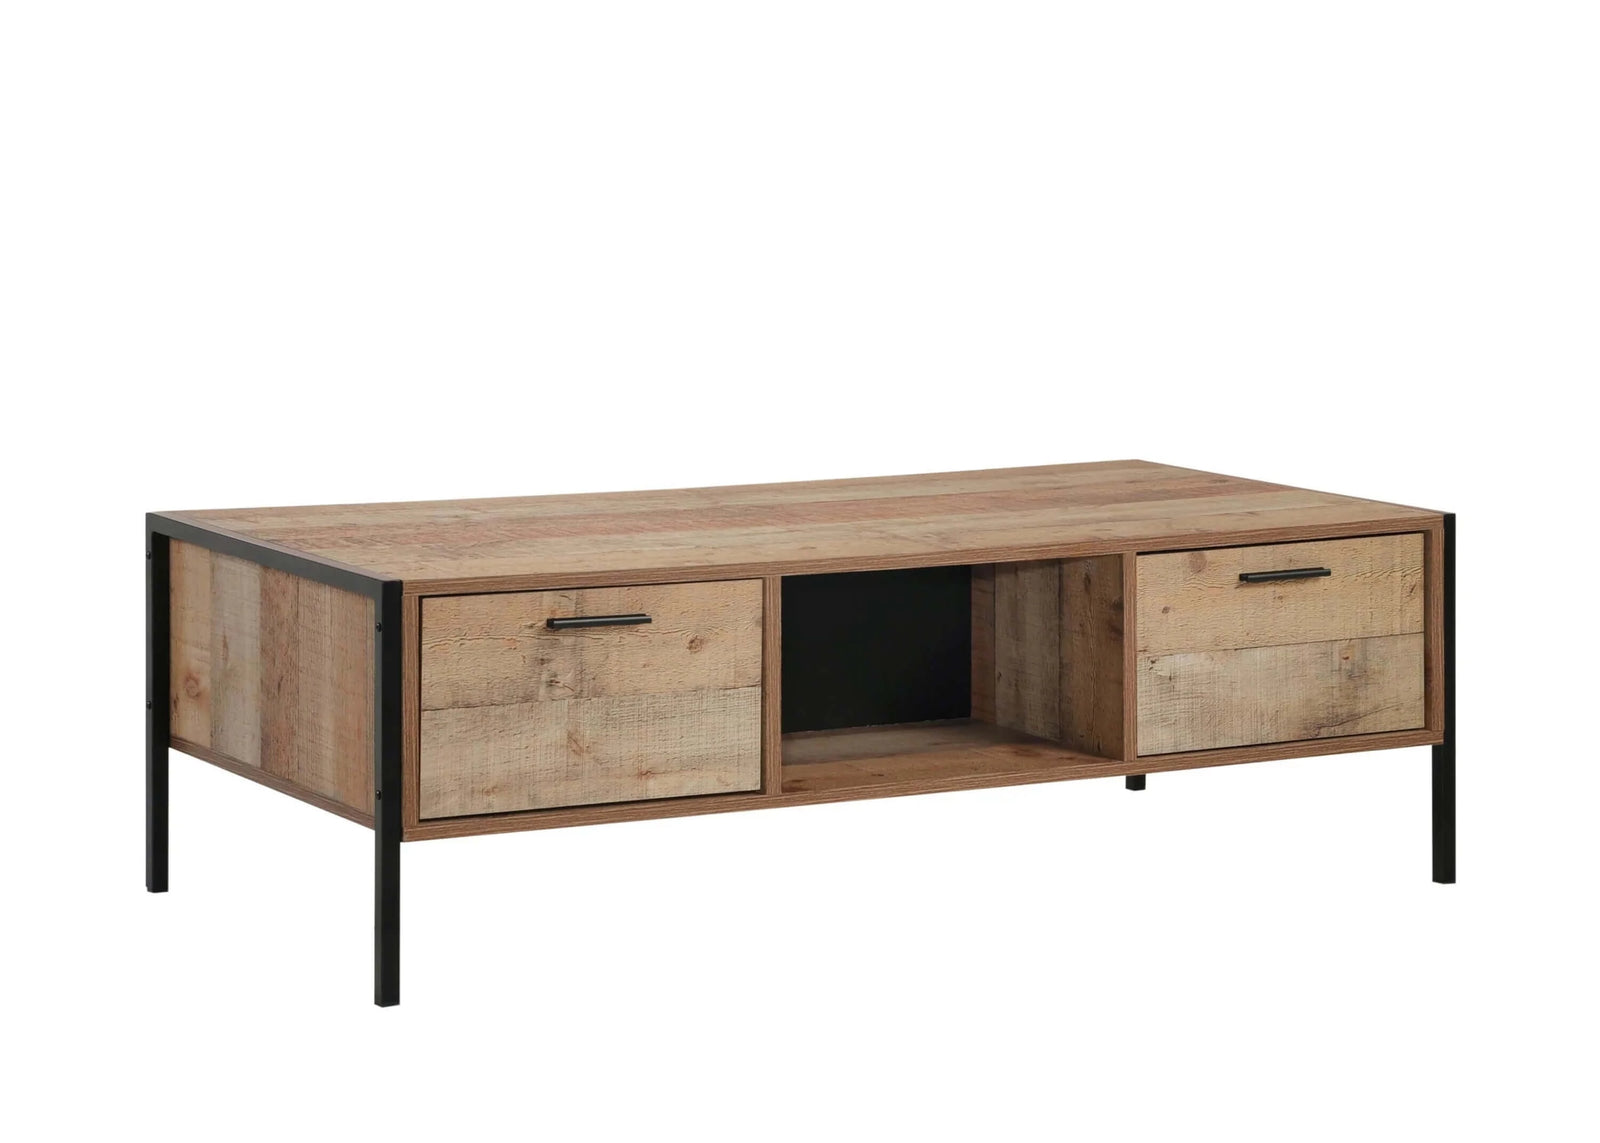 Buy Coffee Table 2 Drawers Particle Board Storage in Oak – Upinteriors-Upinteriors